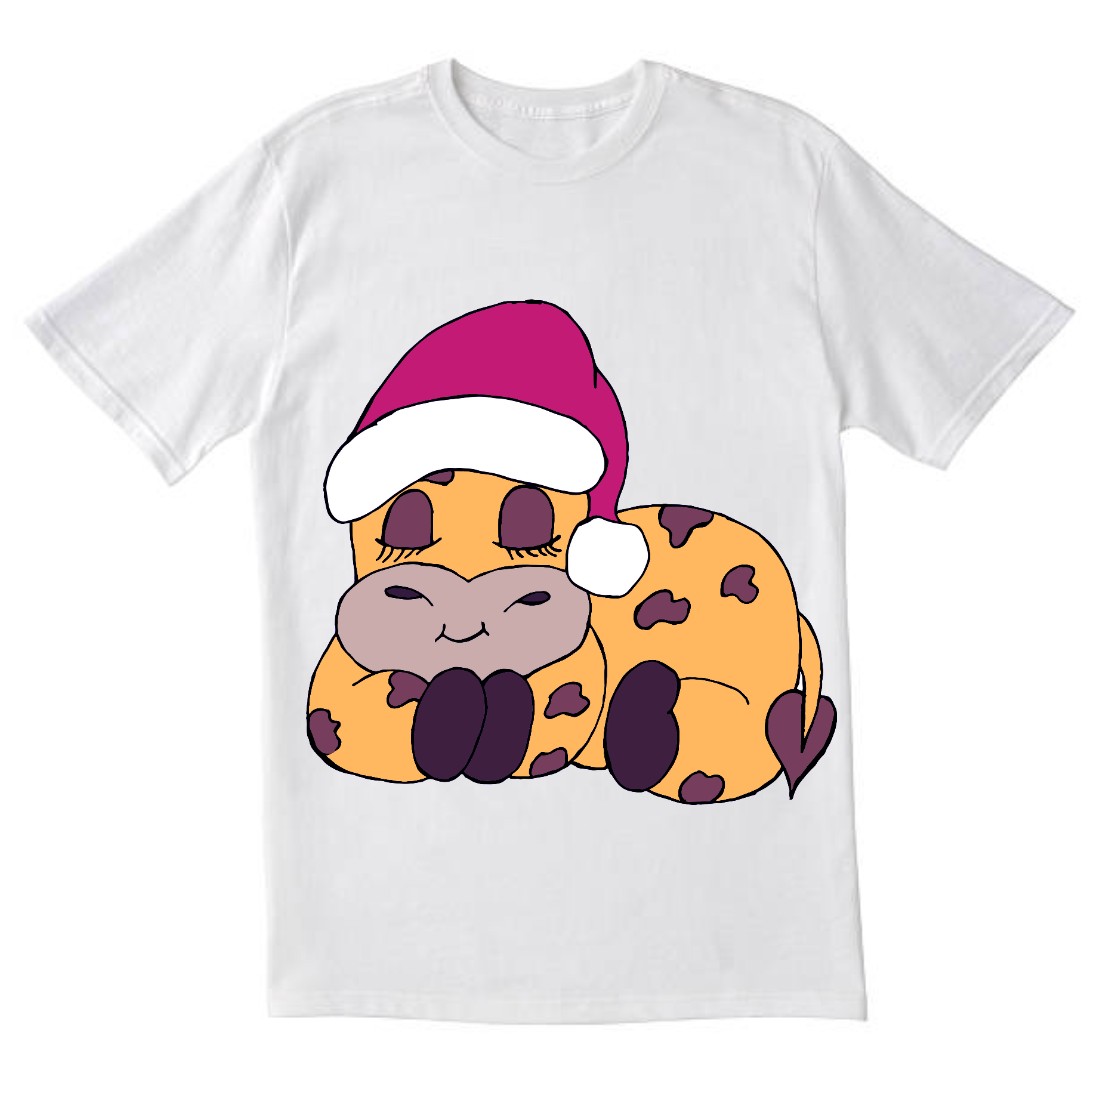 Image of a white t-shirt with a gorgeous print of a sleeping giraffe wearing a santa hat.